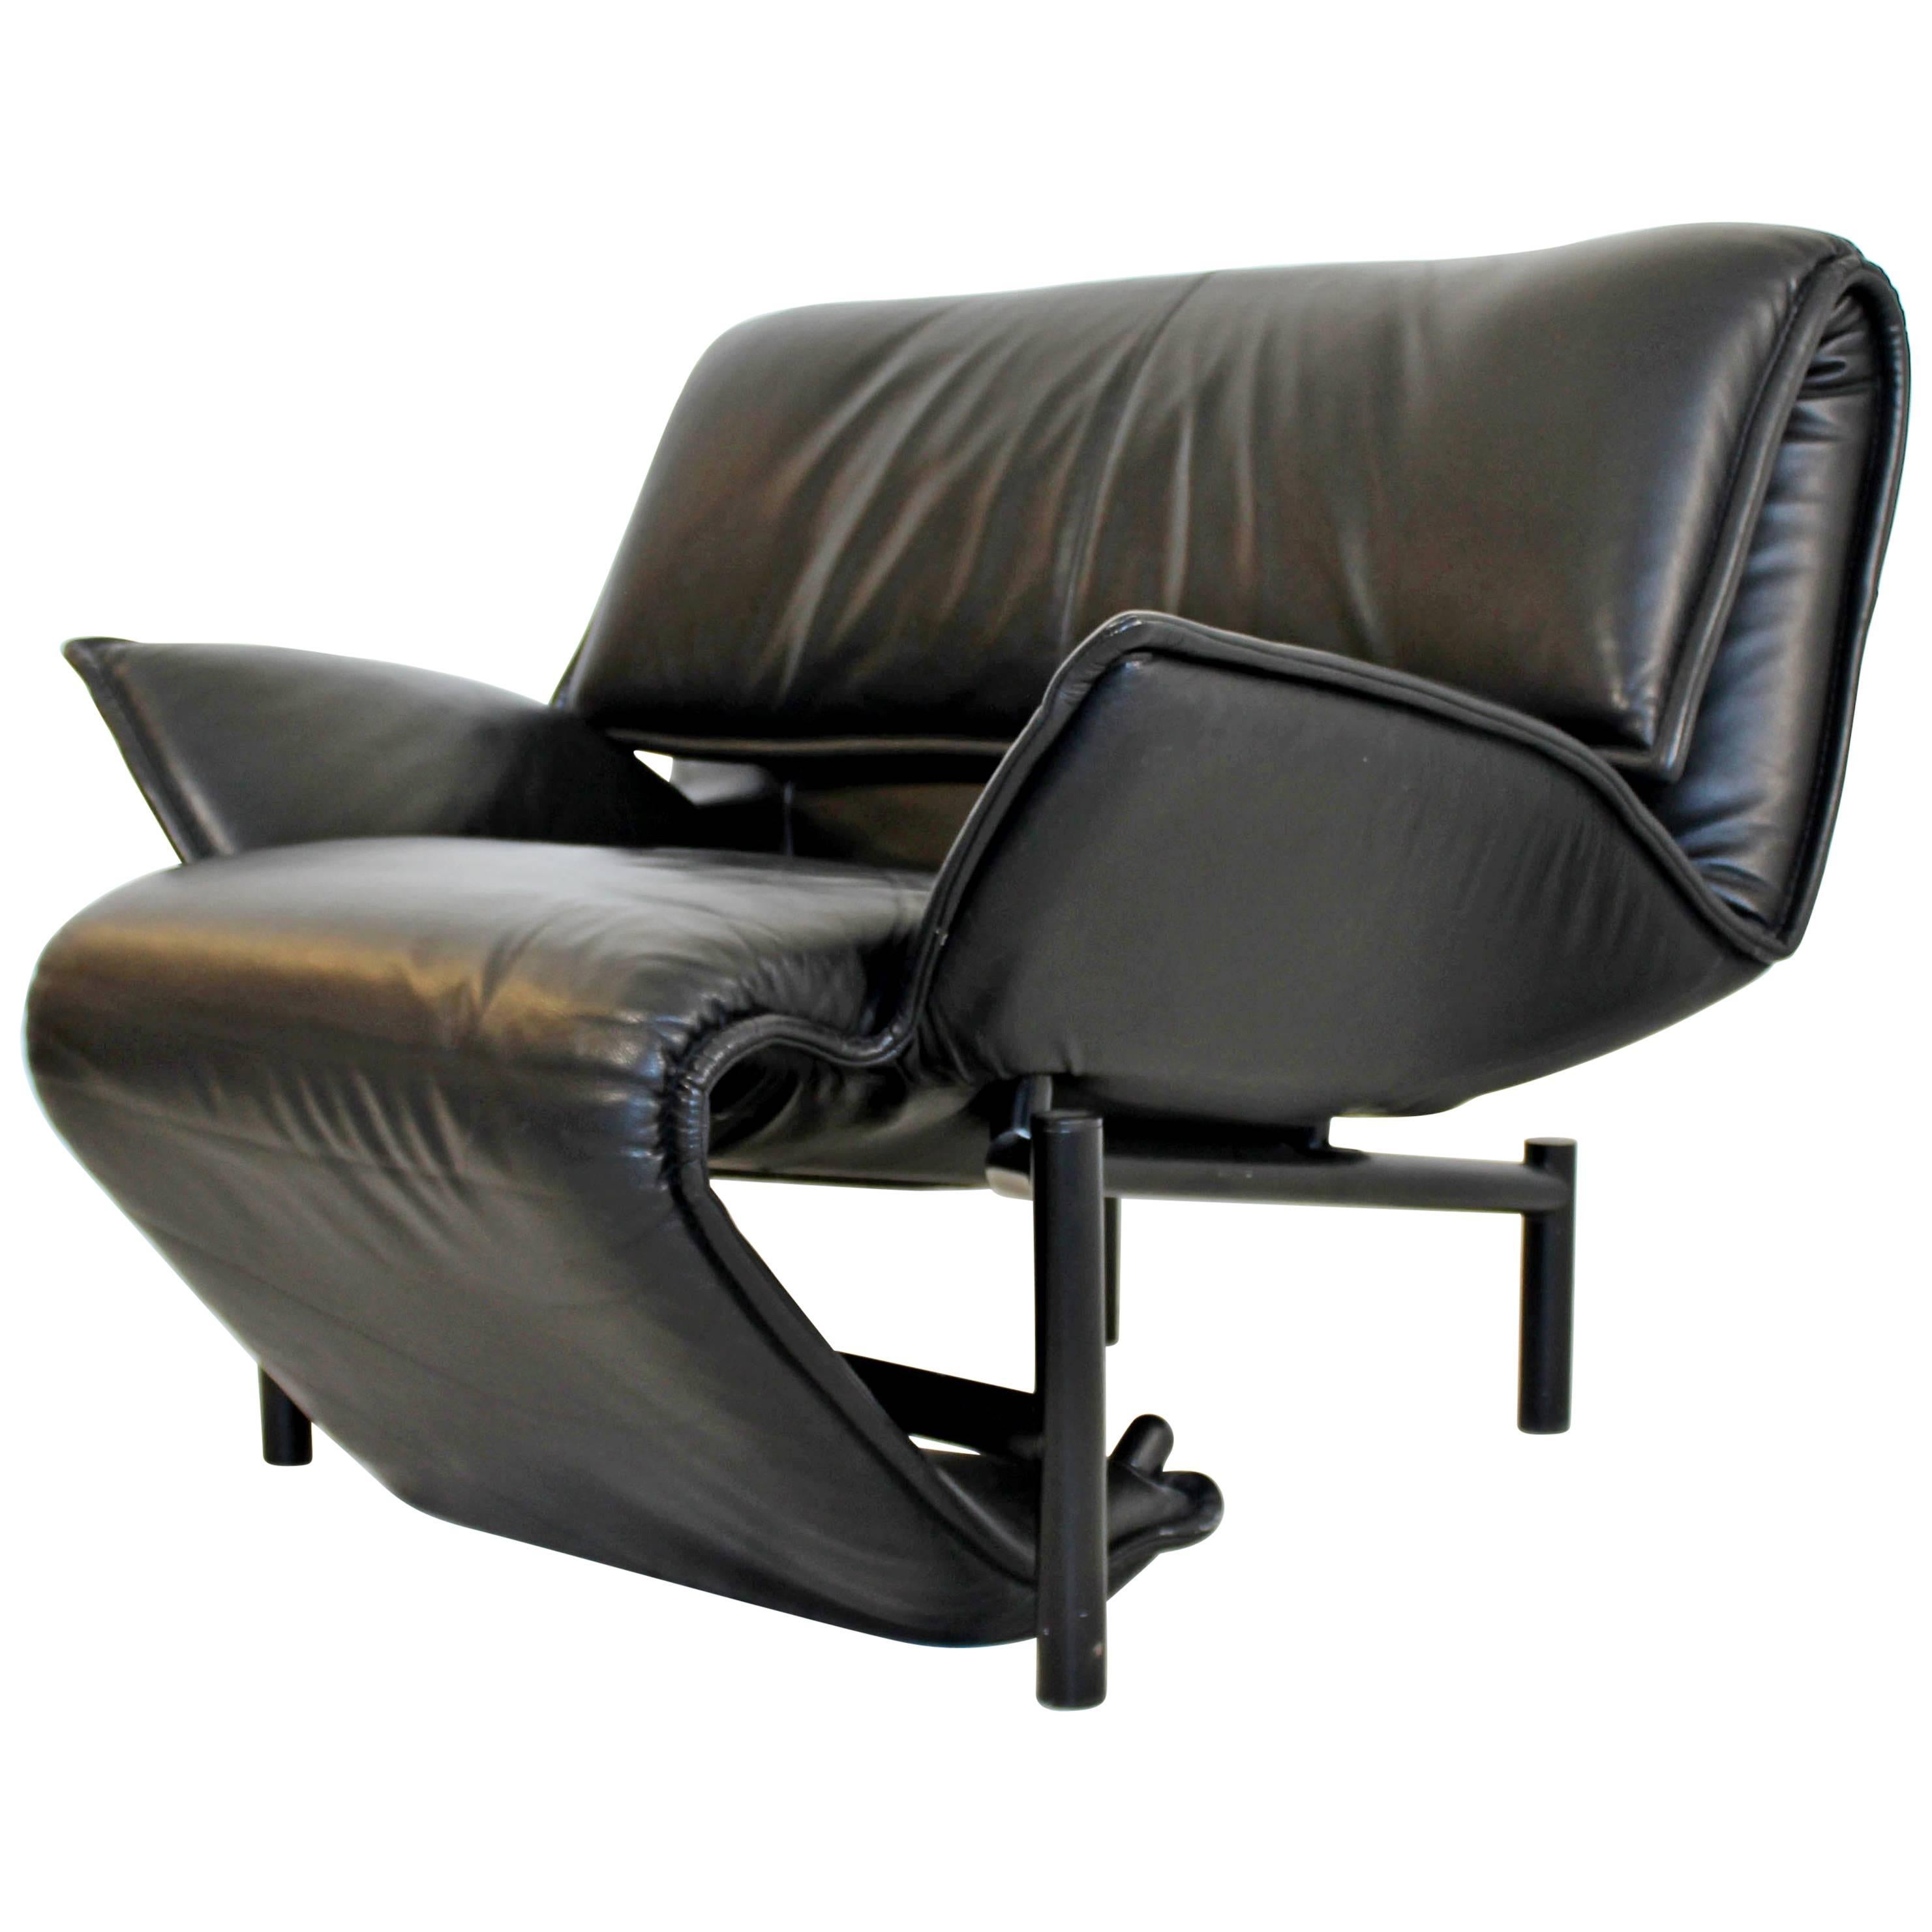 Mid-Century Modern Black Leather Recliner Lounge Chairs Magistretti for Cassina